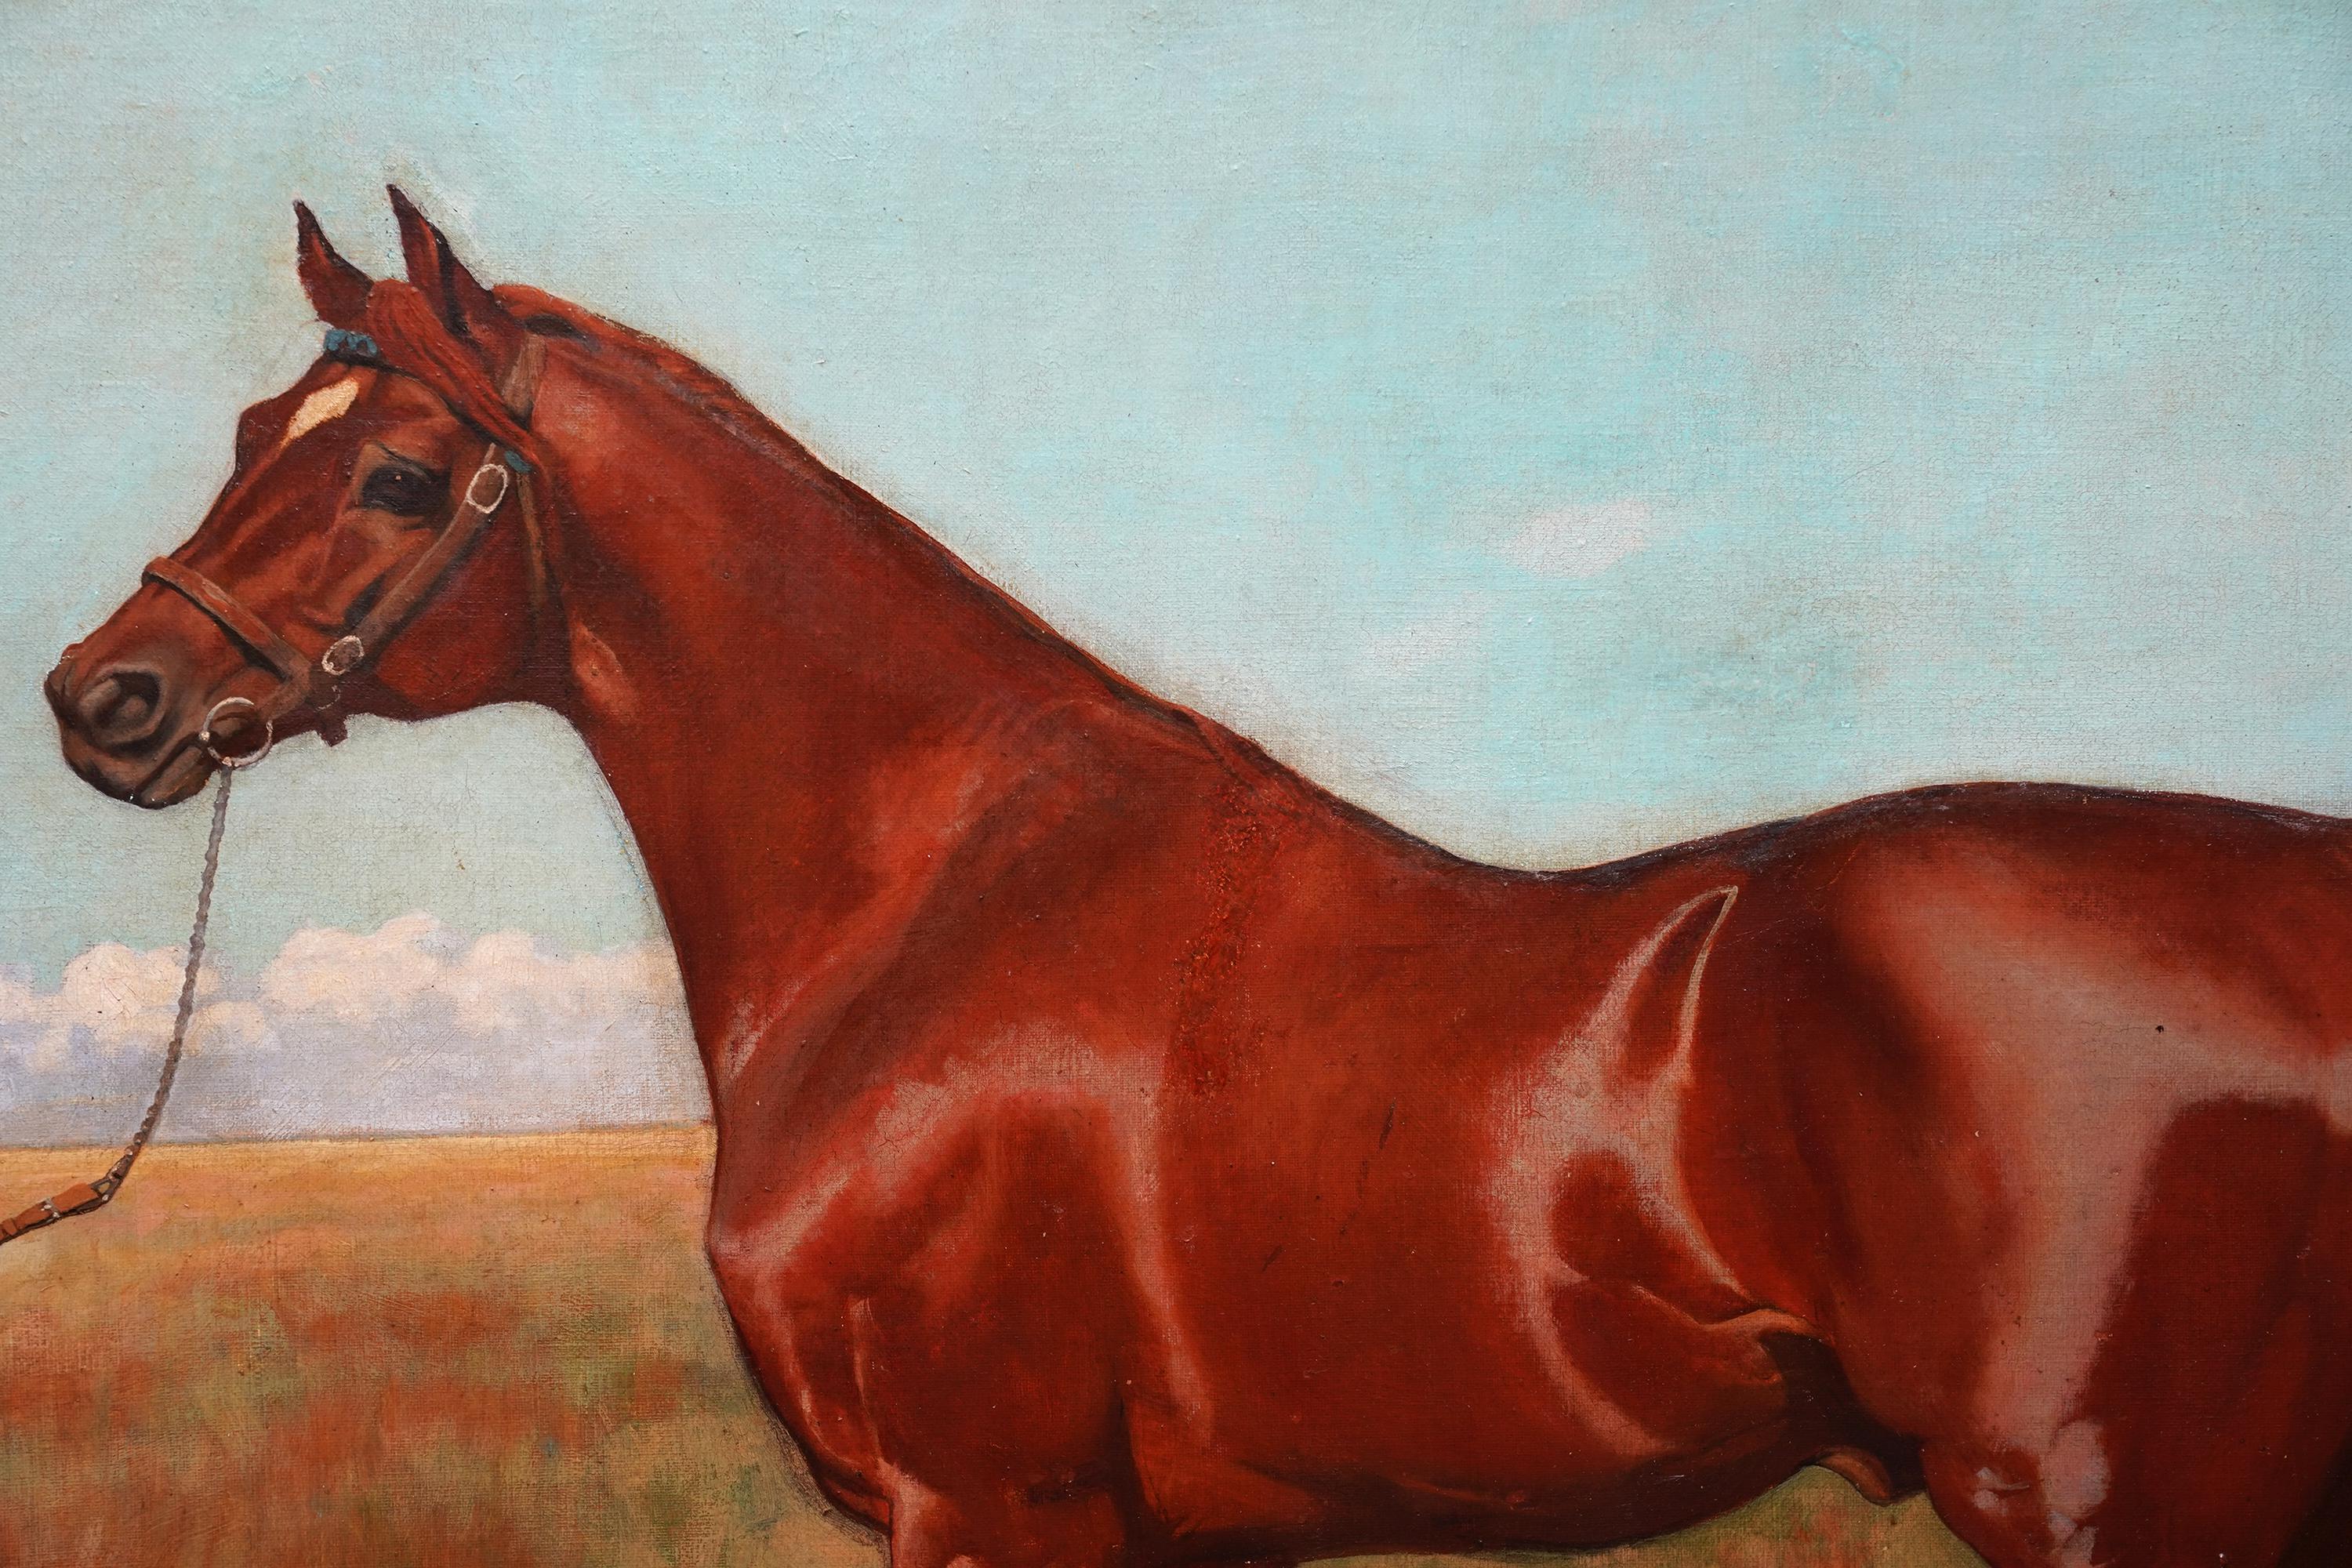 This superb British 19th century equine oil painting is by noted horse lover, George Gascoyne. Painted in 1889, this French born chestnut horse is Phoenix. While he was essentially a miler, Phoenix (sometimes seen spelled as “Phenix”) came from a